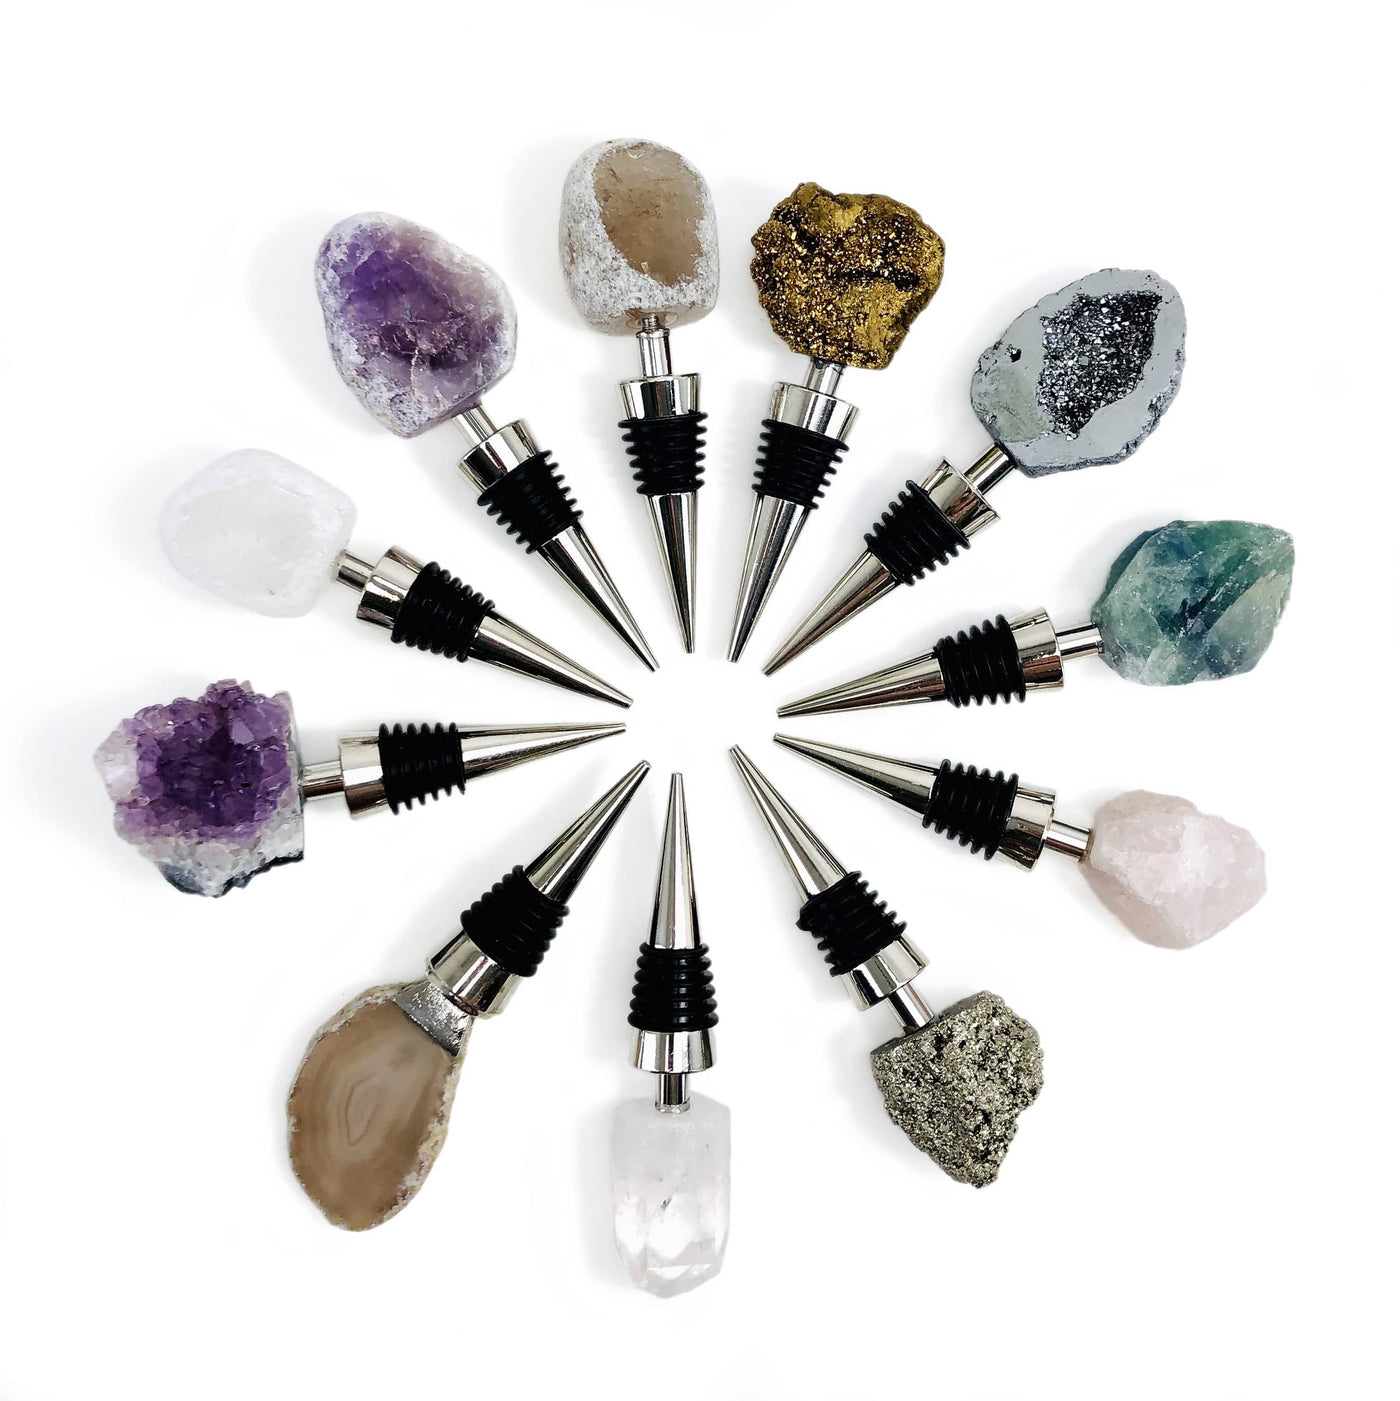 Crystal Bottle Stoppers (11 total, with different crystals on top)